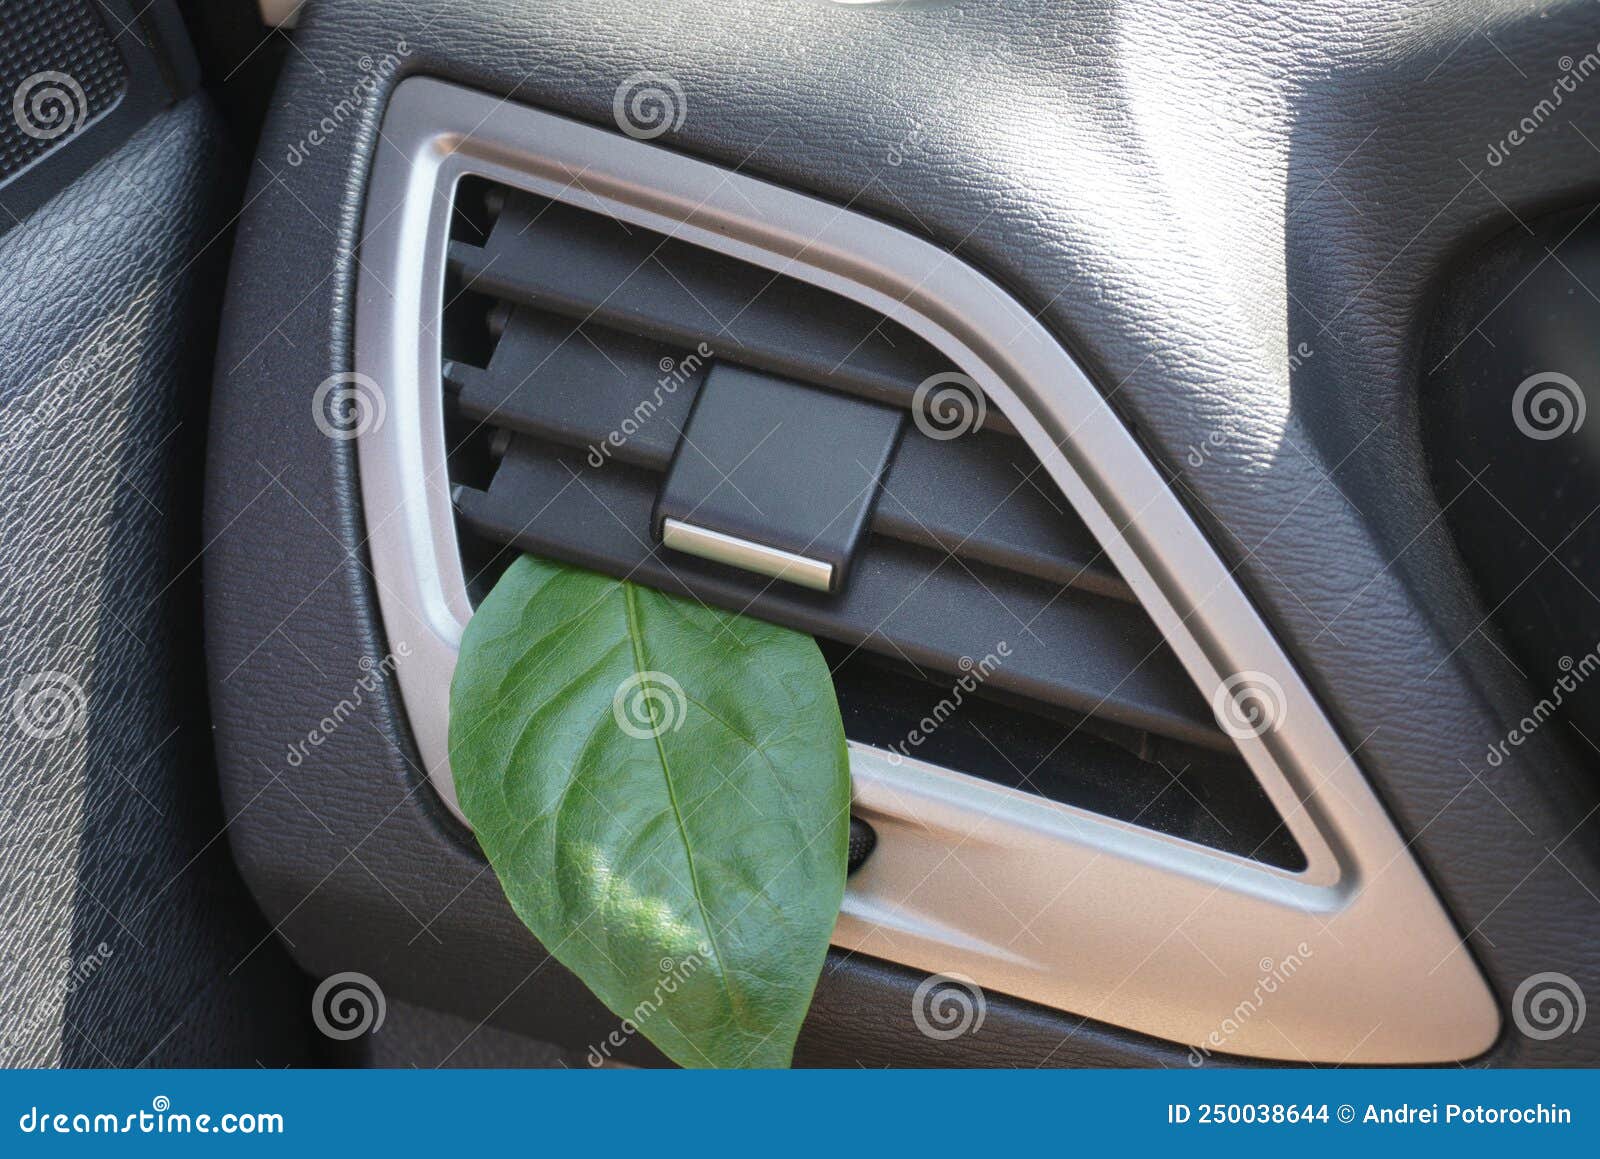 https://thumbs.dreamstime.com/z/green-leaf-ventilation-grille-car-as-symbol-clean-air-safe-conditioning-250038644.jpg